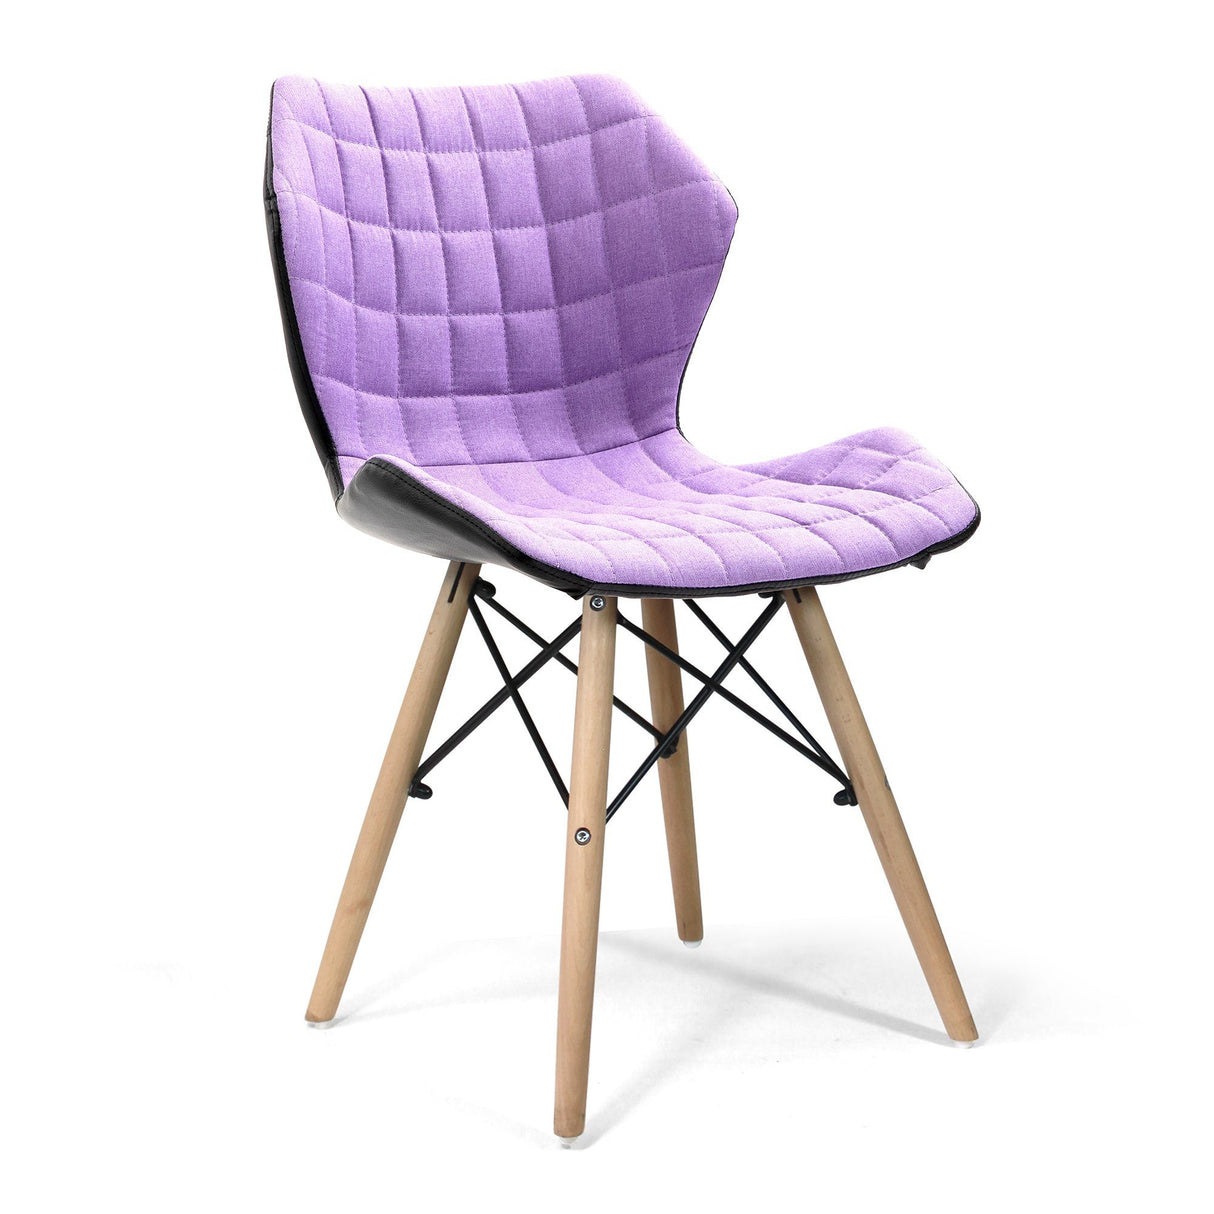 Nautilus Designs Amelia Stylish Lightweight Fabric Chair with Solid Beech Legs and Contemporary Panel Stitching - Purple